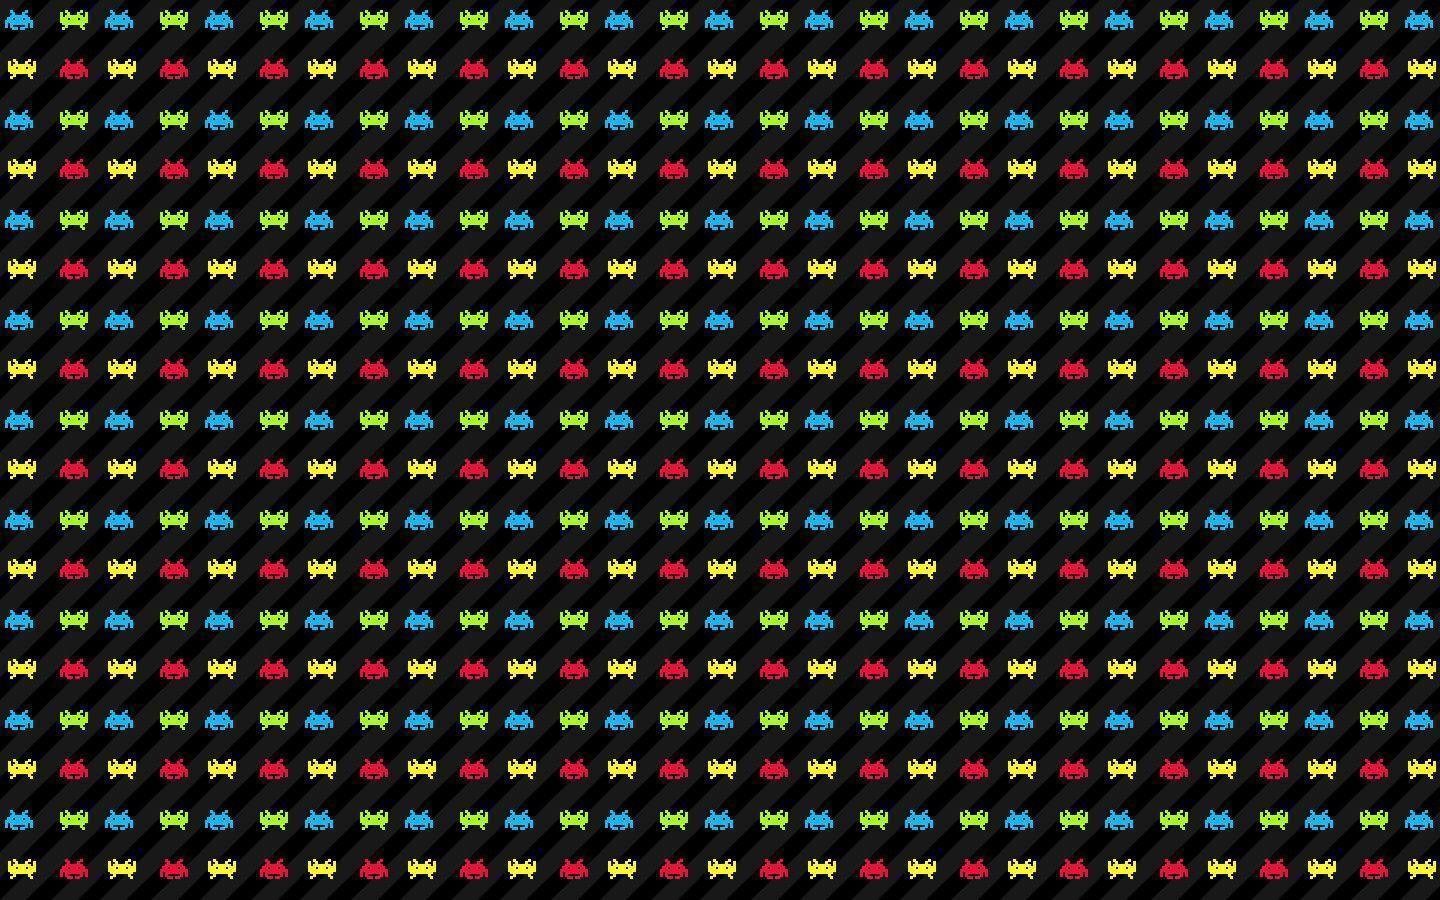 Space Invaders Wallpaper 37581 1440x900 px